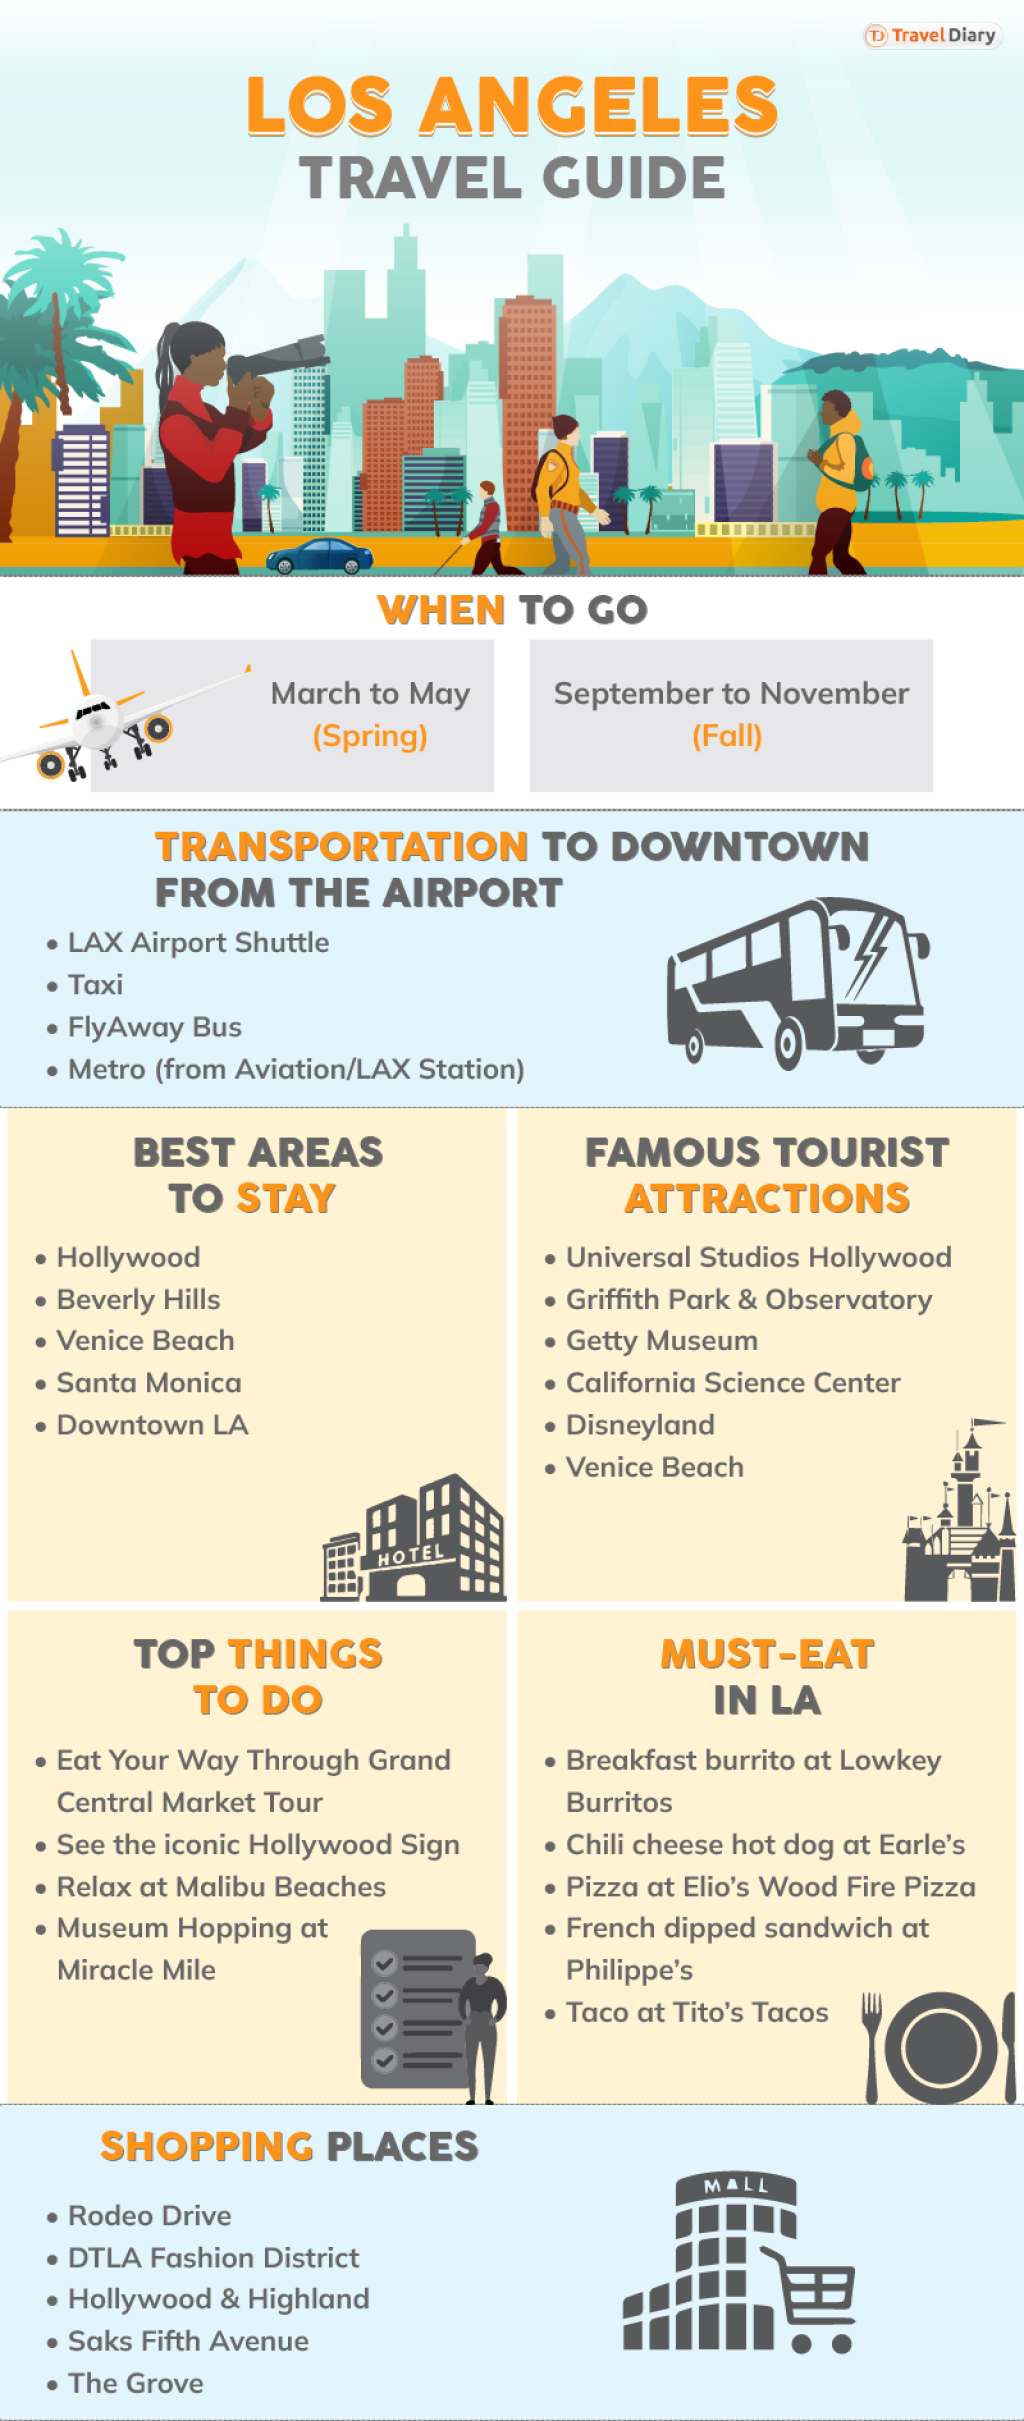 travel plan los angeles - The Ultimate Los Angeles Travel Guide  Travel Diary